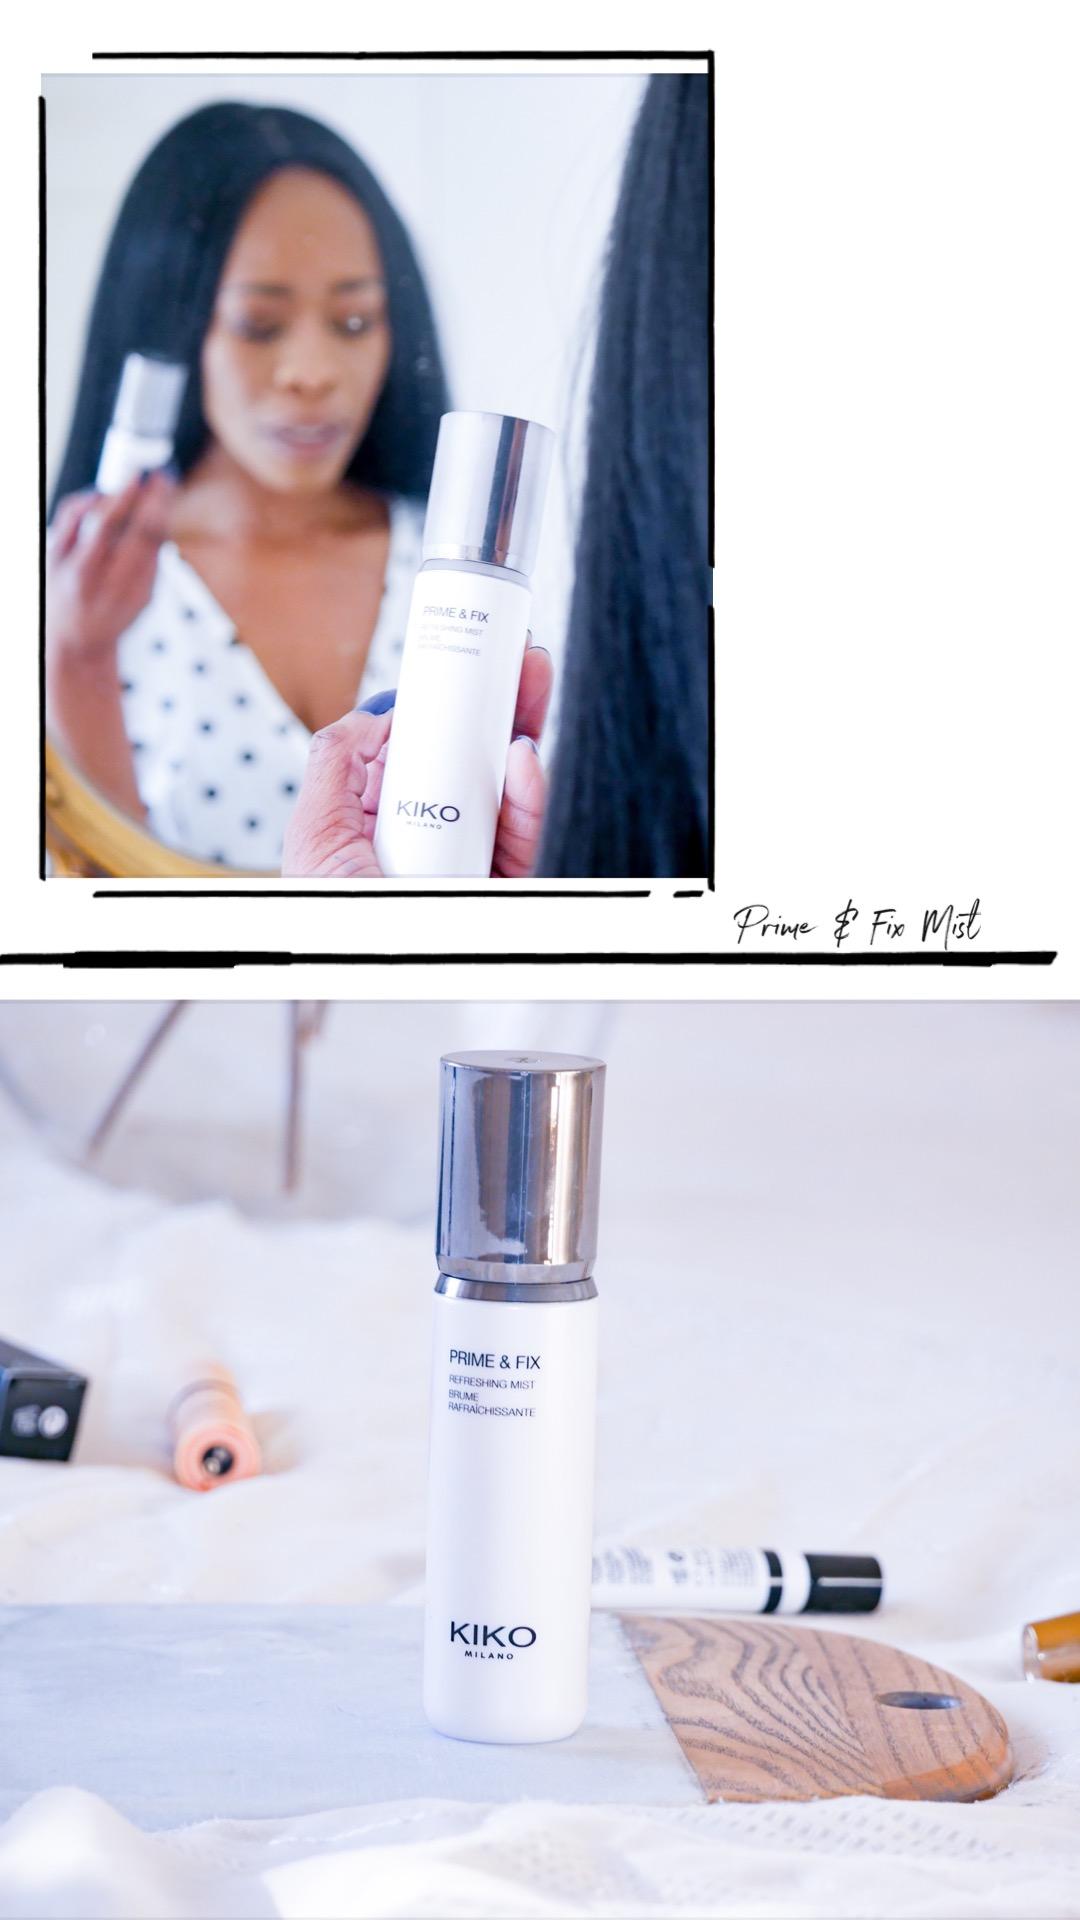 What I bought from KIKO Milano Online| My thoughts on everything I bought - all under £10 including this Prime & Fix mist |If you're looking for cruelty free, affordable makeup and beauty, then you'll definitely be interested| www.kittyandb.com #KIKOTrendsetters #settingspray #beautyreviews #crueltyfree #beautyblog